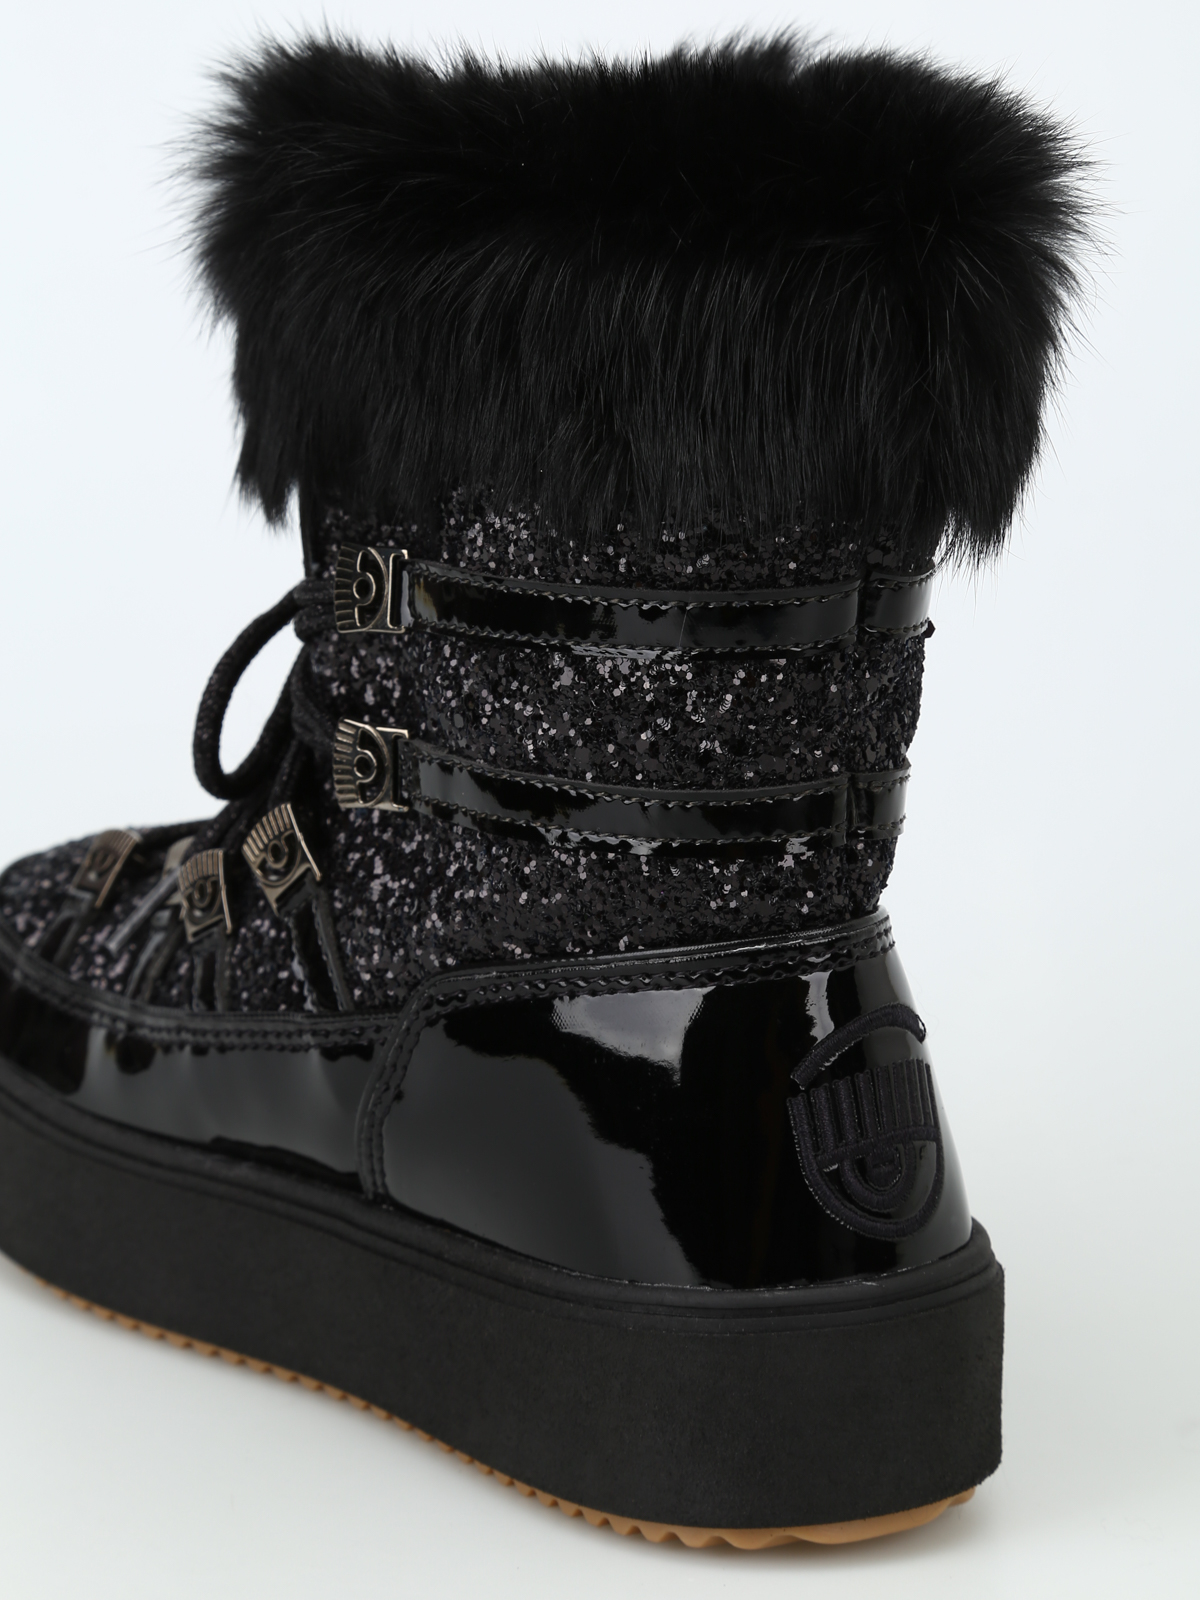 black patent leather snow boots